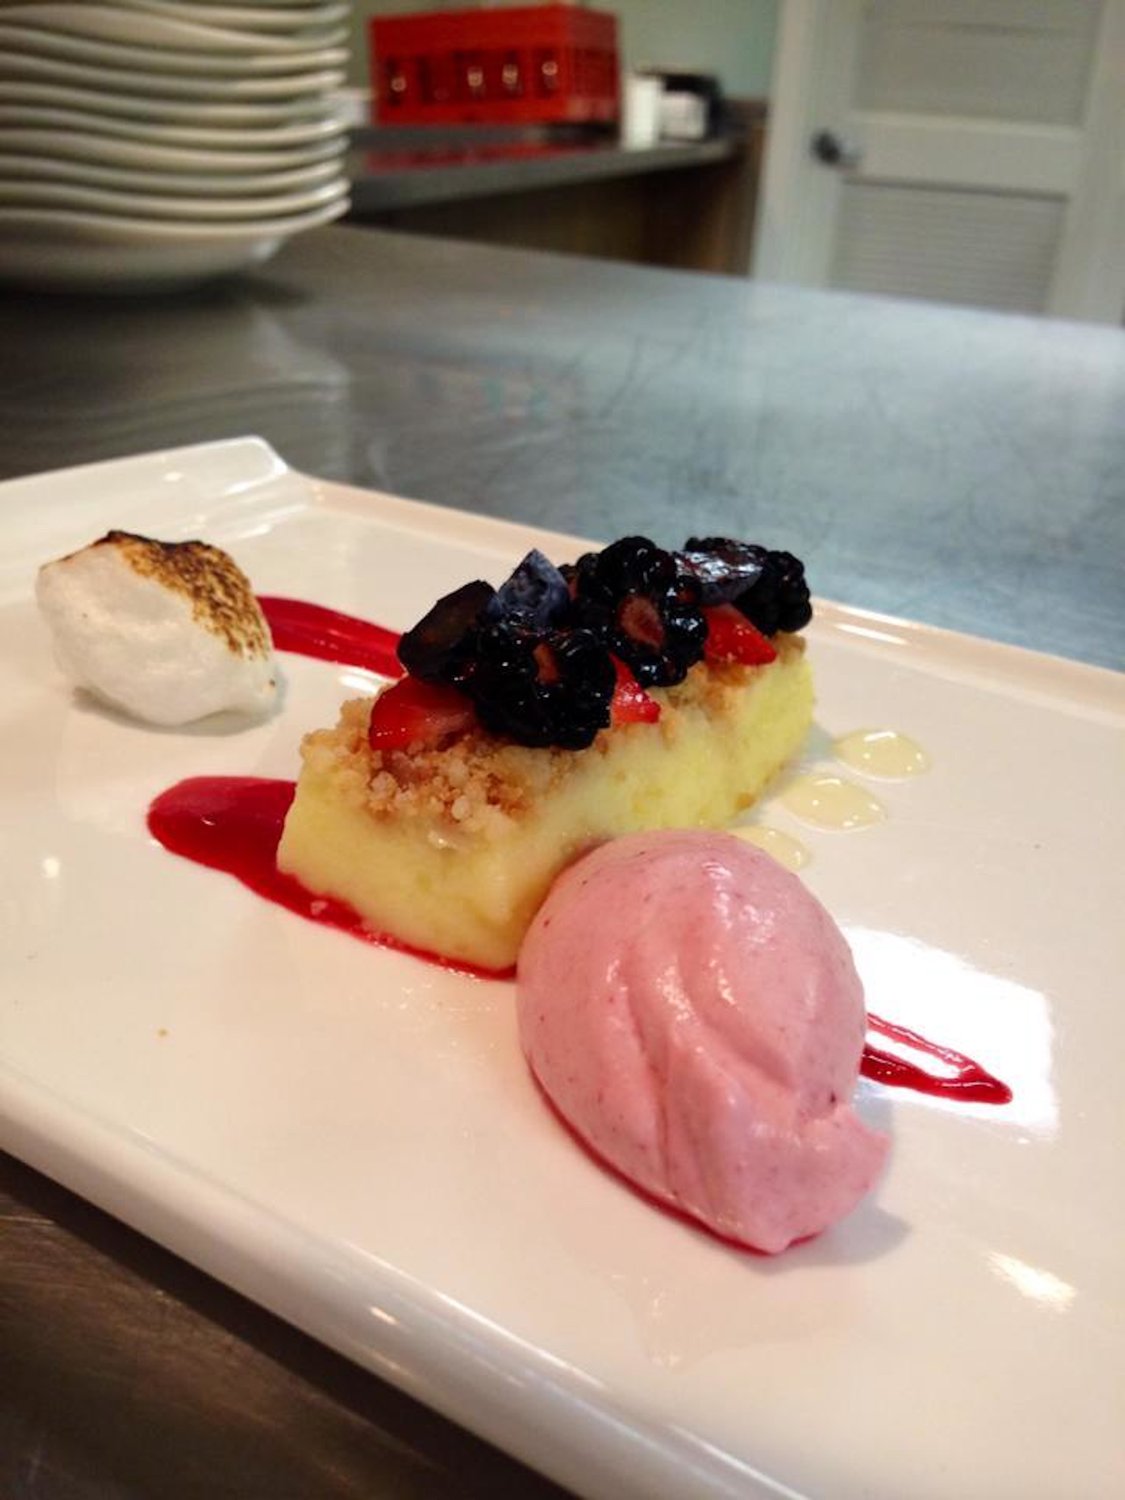 Lemon bar with shortbread crumble, raspberry mousse, toasted meringue and berries.